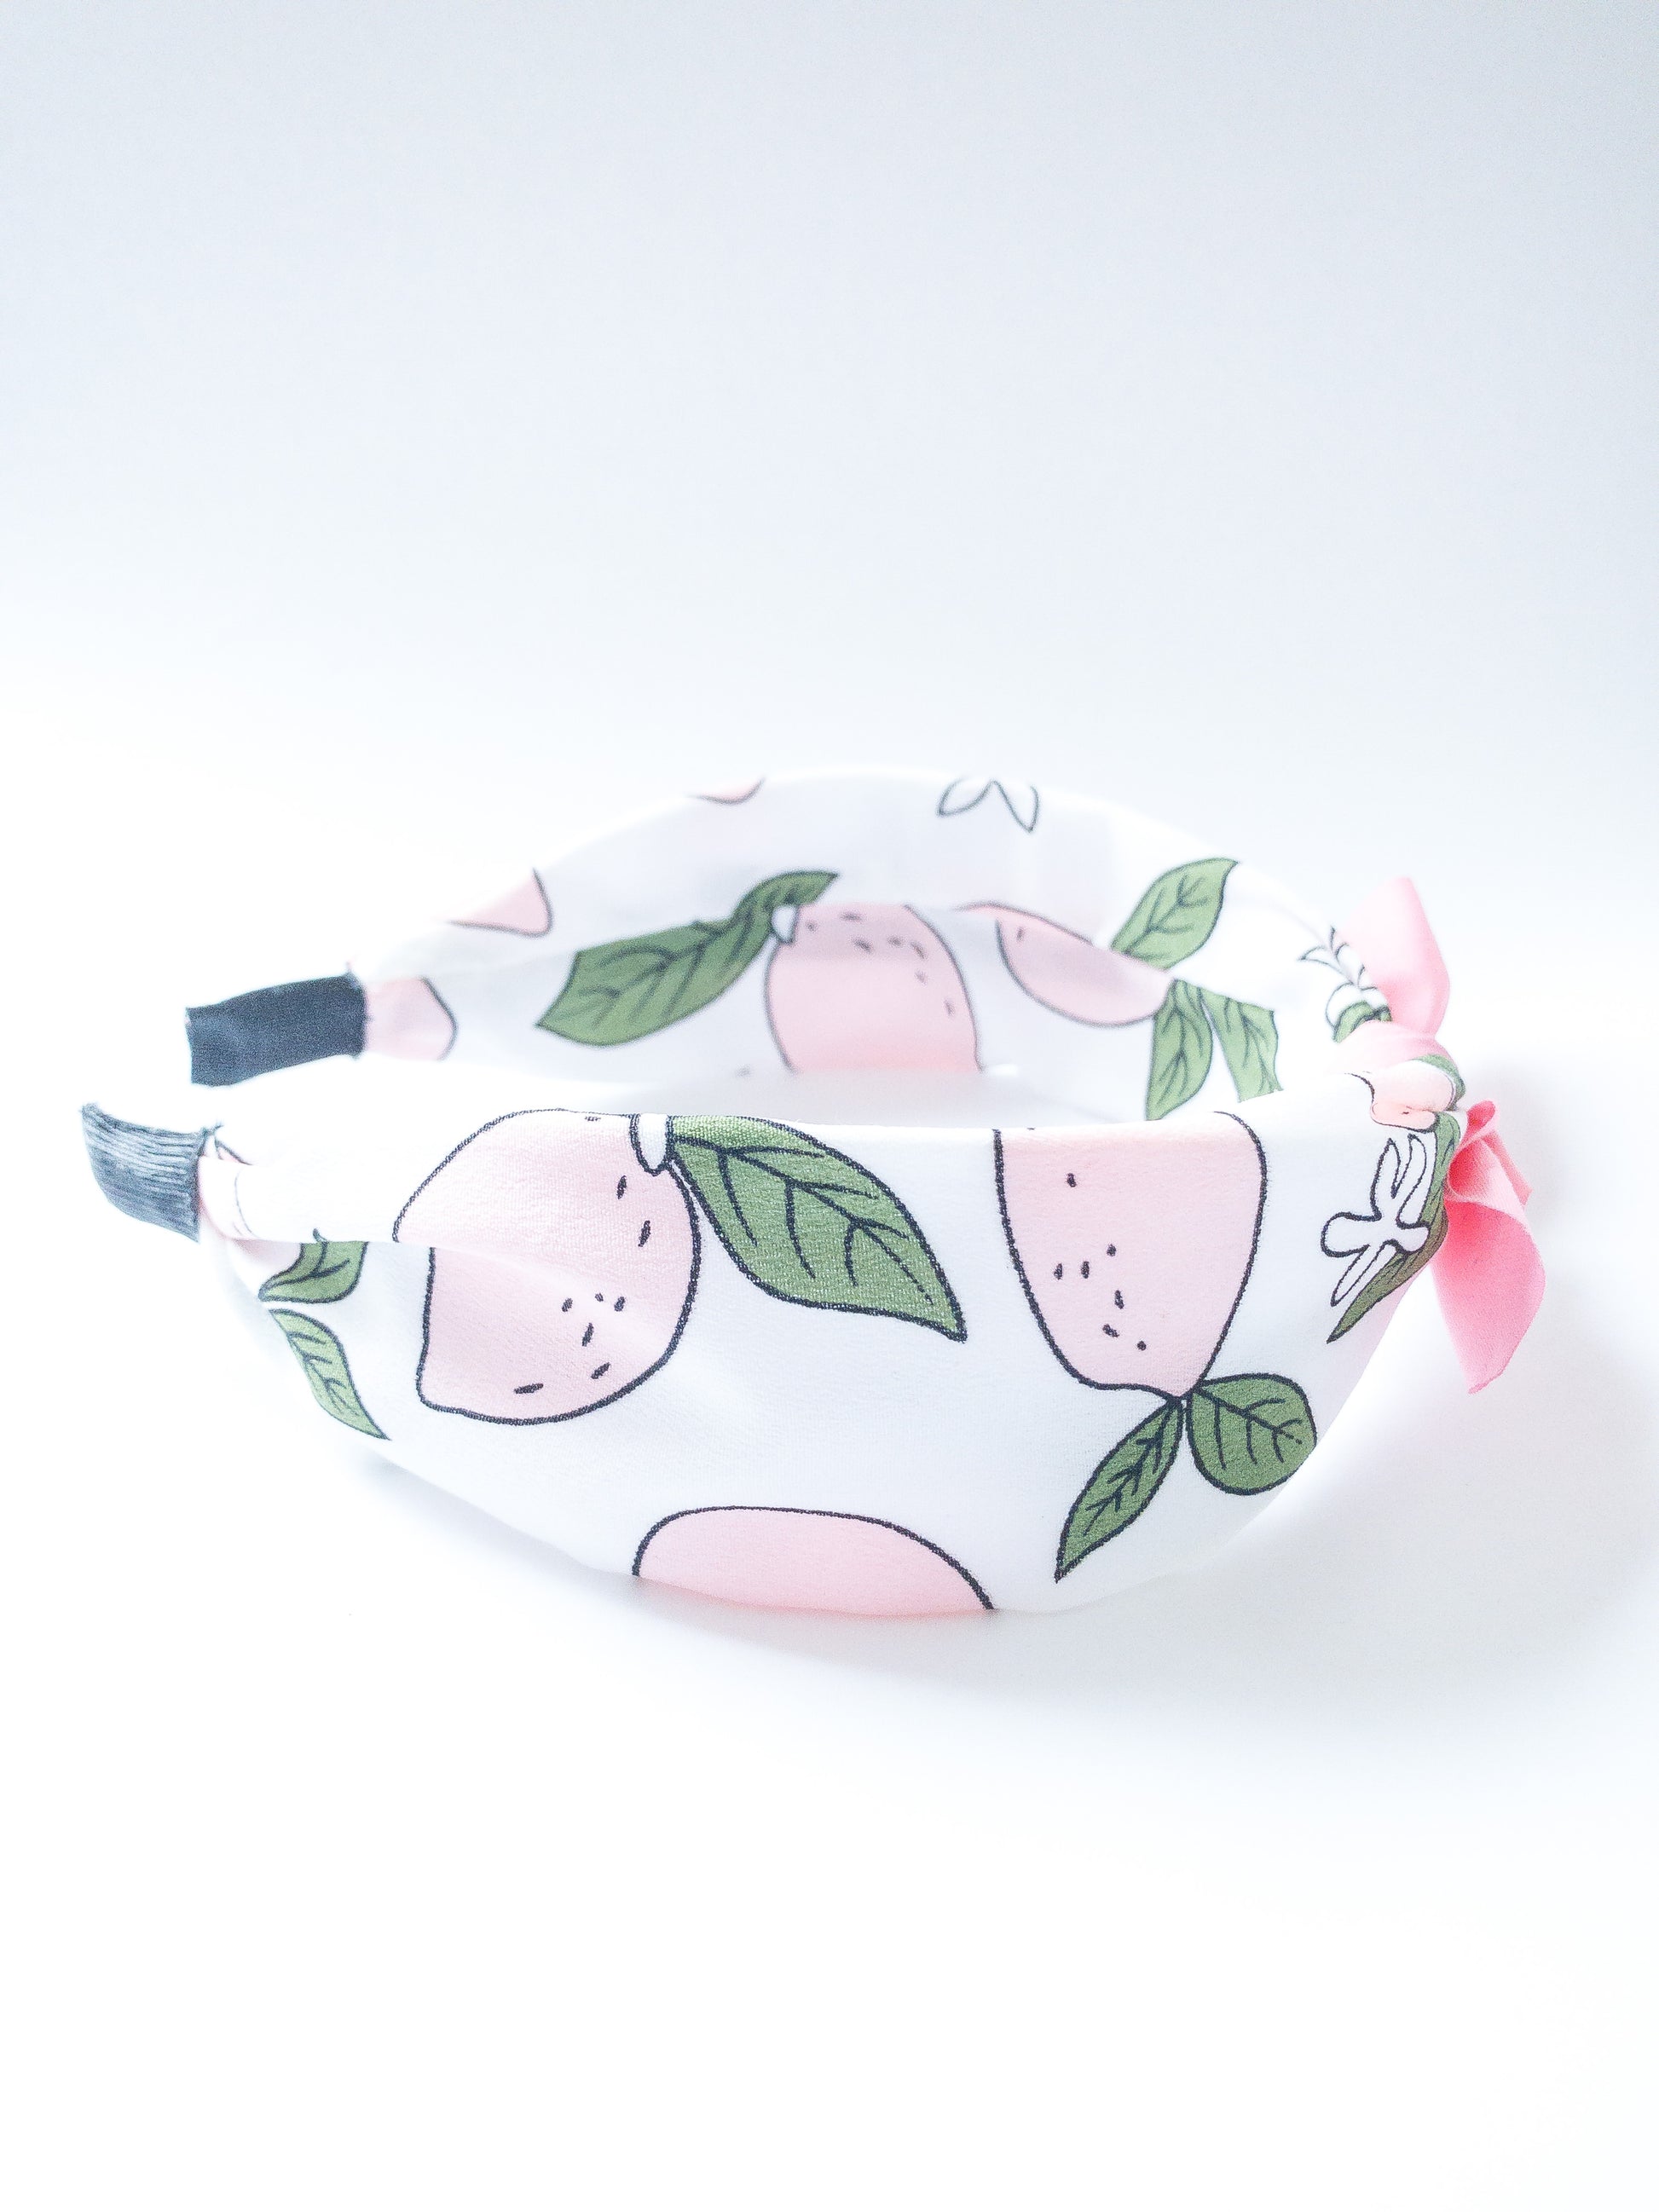 Not only is this headband so so cute, but it is also very comfortable! Each headband is wrapped in a silky fruit patterned fabric with a solid color bow at the top. The ends are also wrapped in fabric. Choose from four different fruits/colors. Best suited for a child.